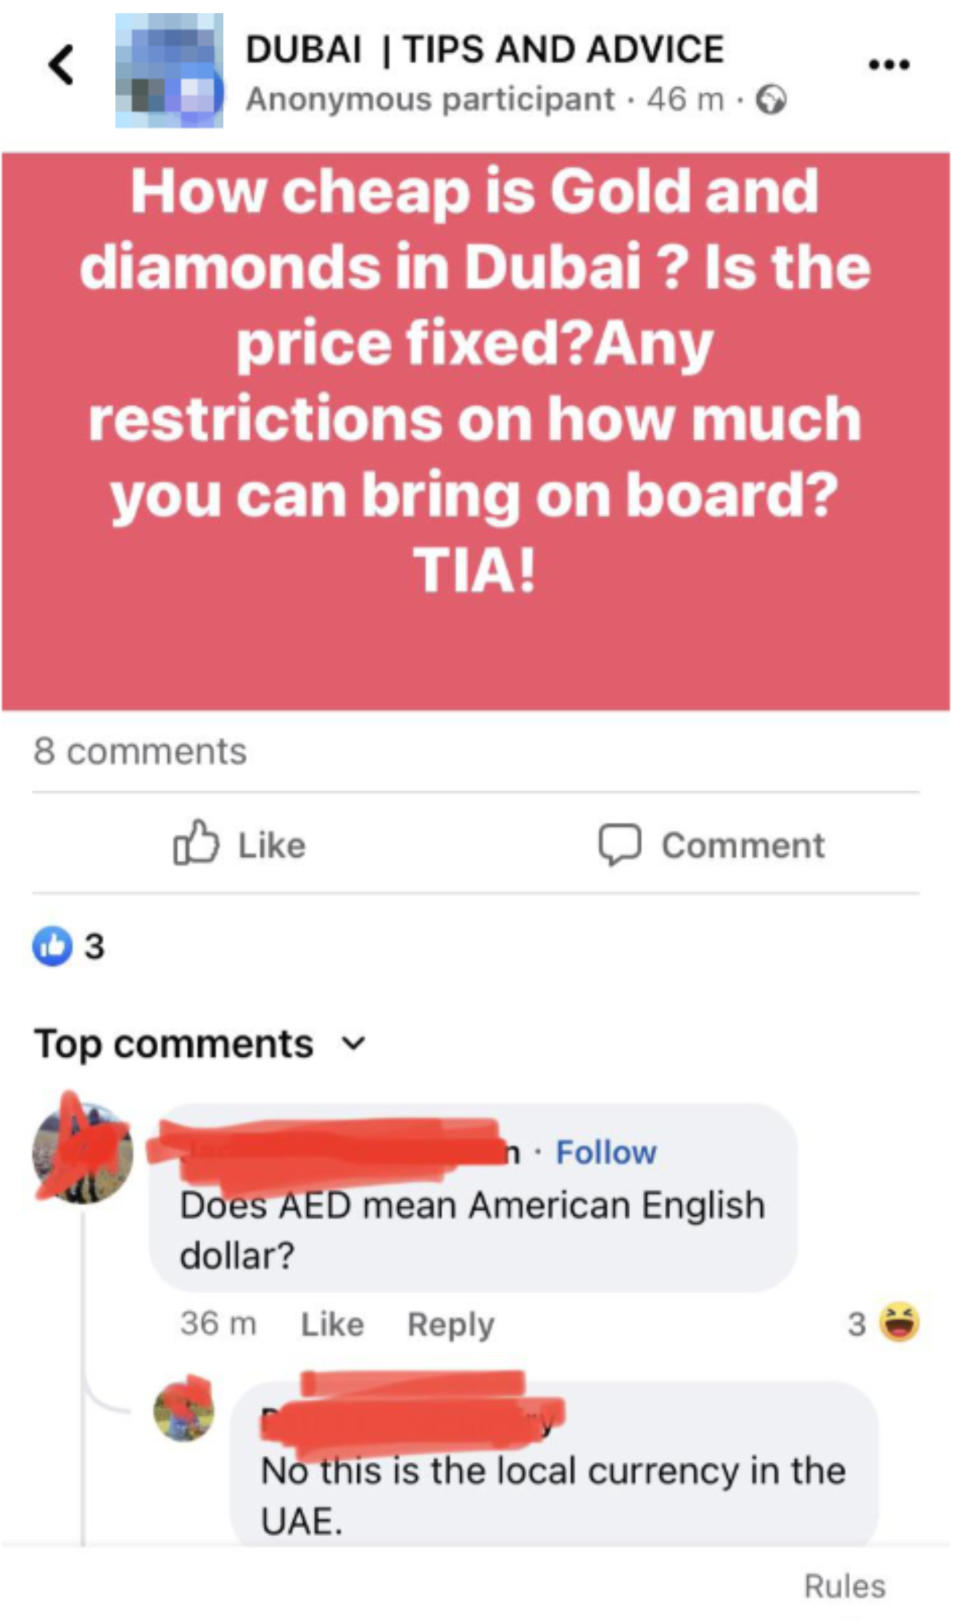 The image shows a screenshot of a social media post asking for tips on how to buy gold in Dubai and whether the price is fixed. There are comments below, one asking what "AED" means